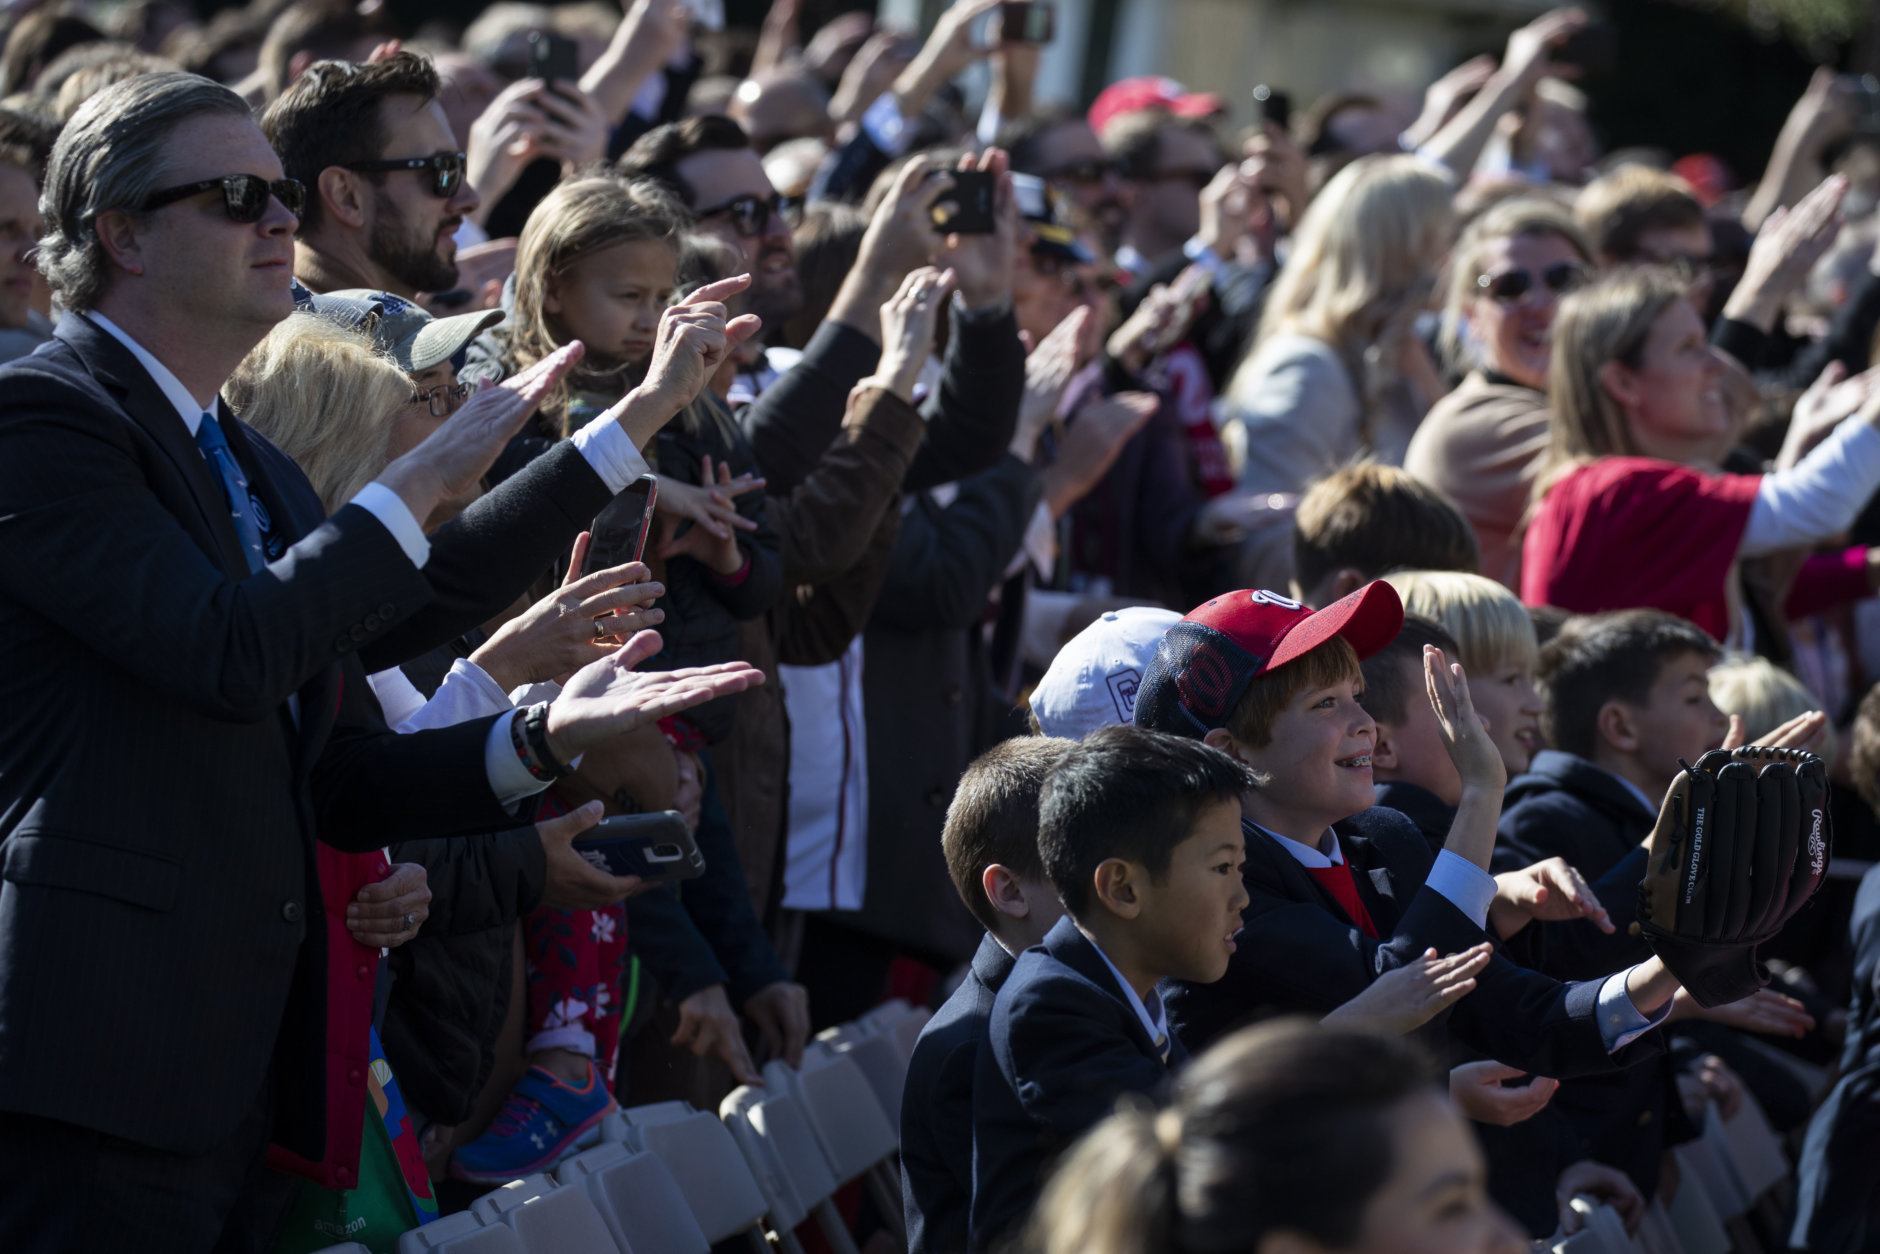 Fans do the "Baby Shark" during an event to honor the 2019 World Series Champion Washington Nationals baseball team, at the White House, Monday, Nov. 4, 2019, in Washington. (AP Photo/ Evan Vucci)